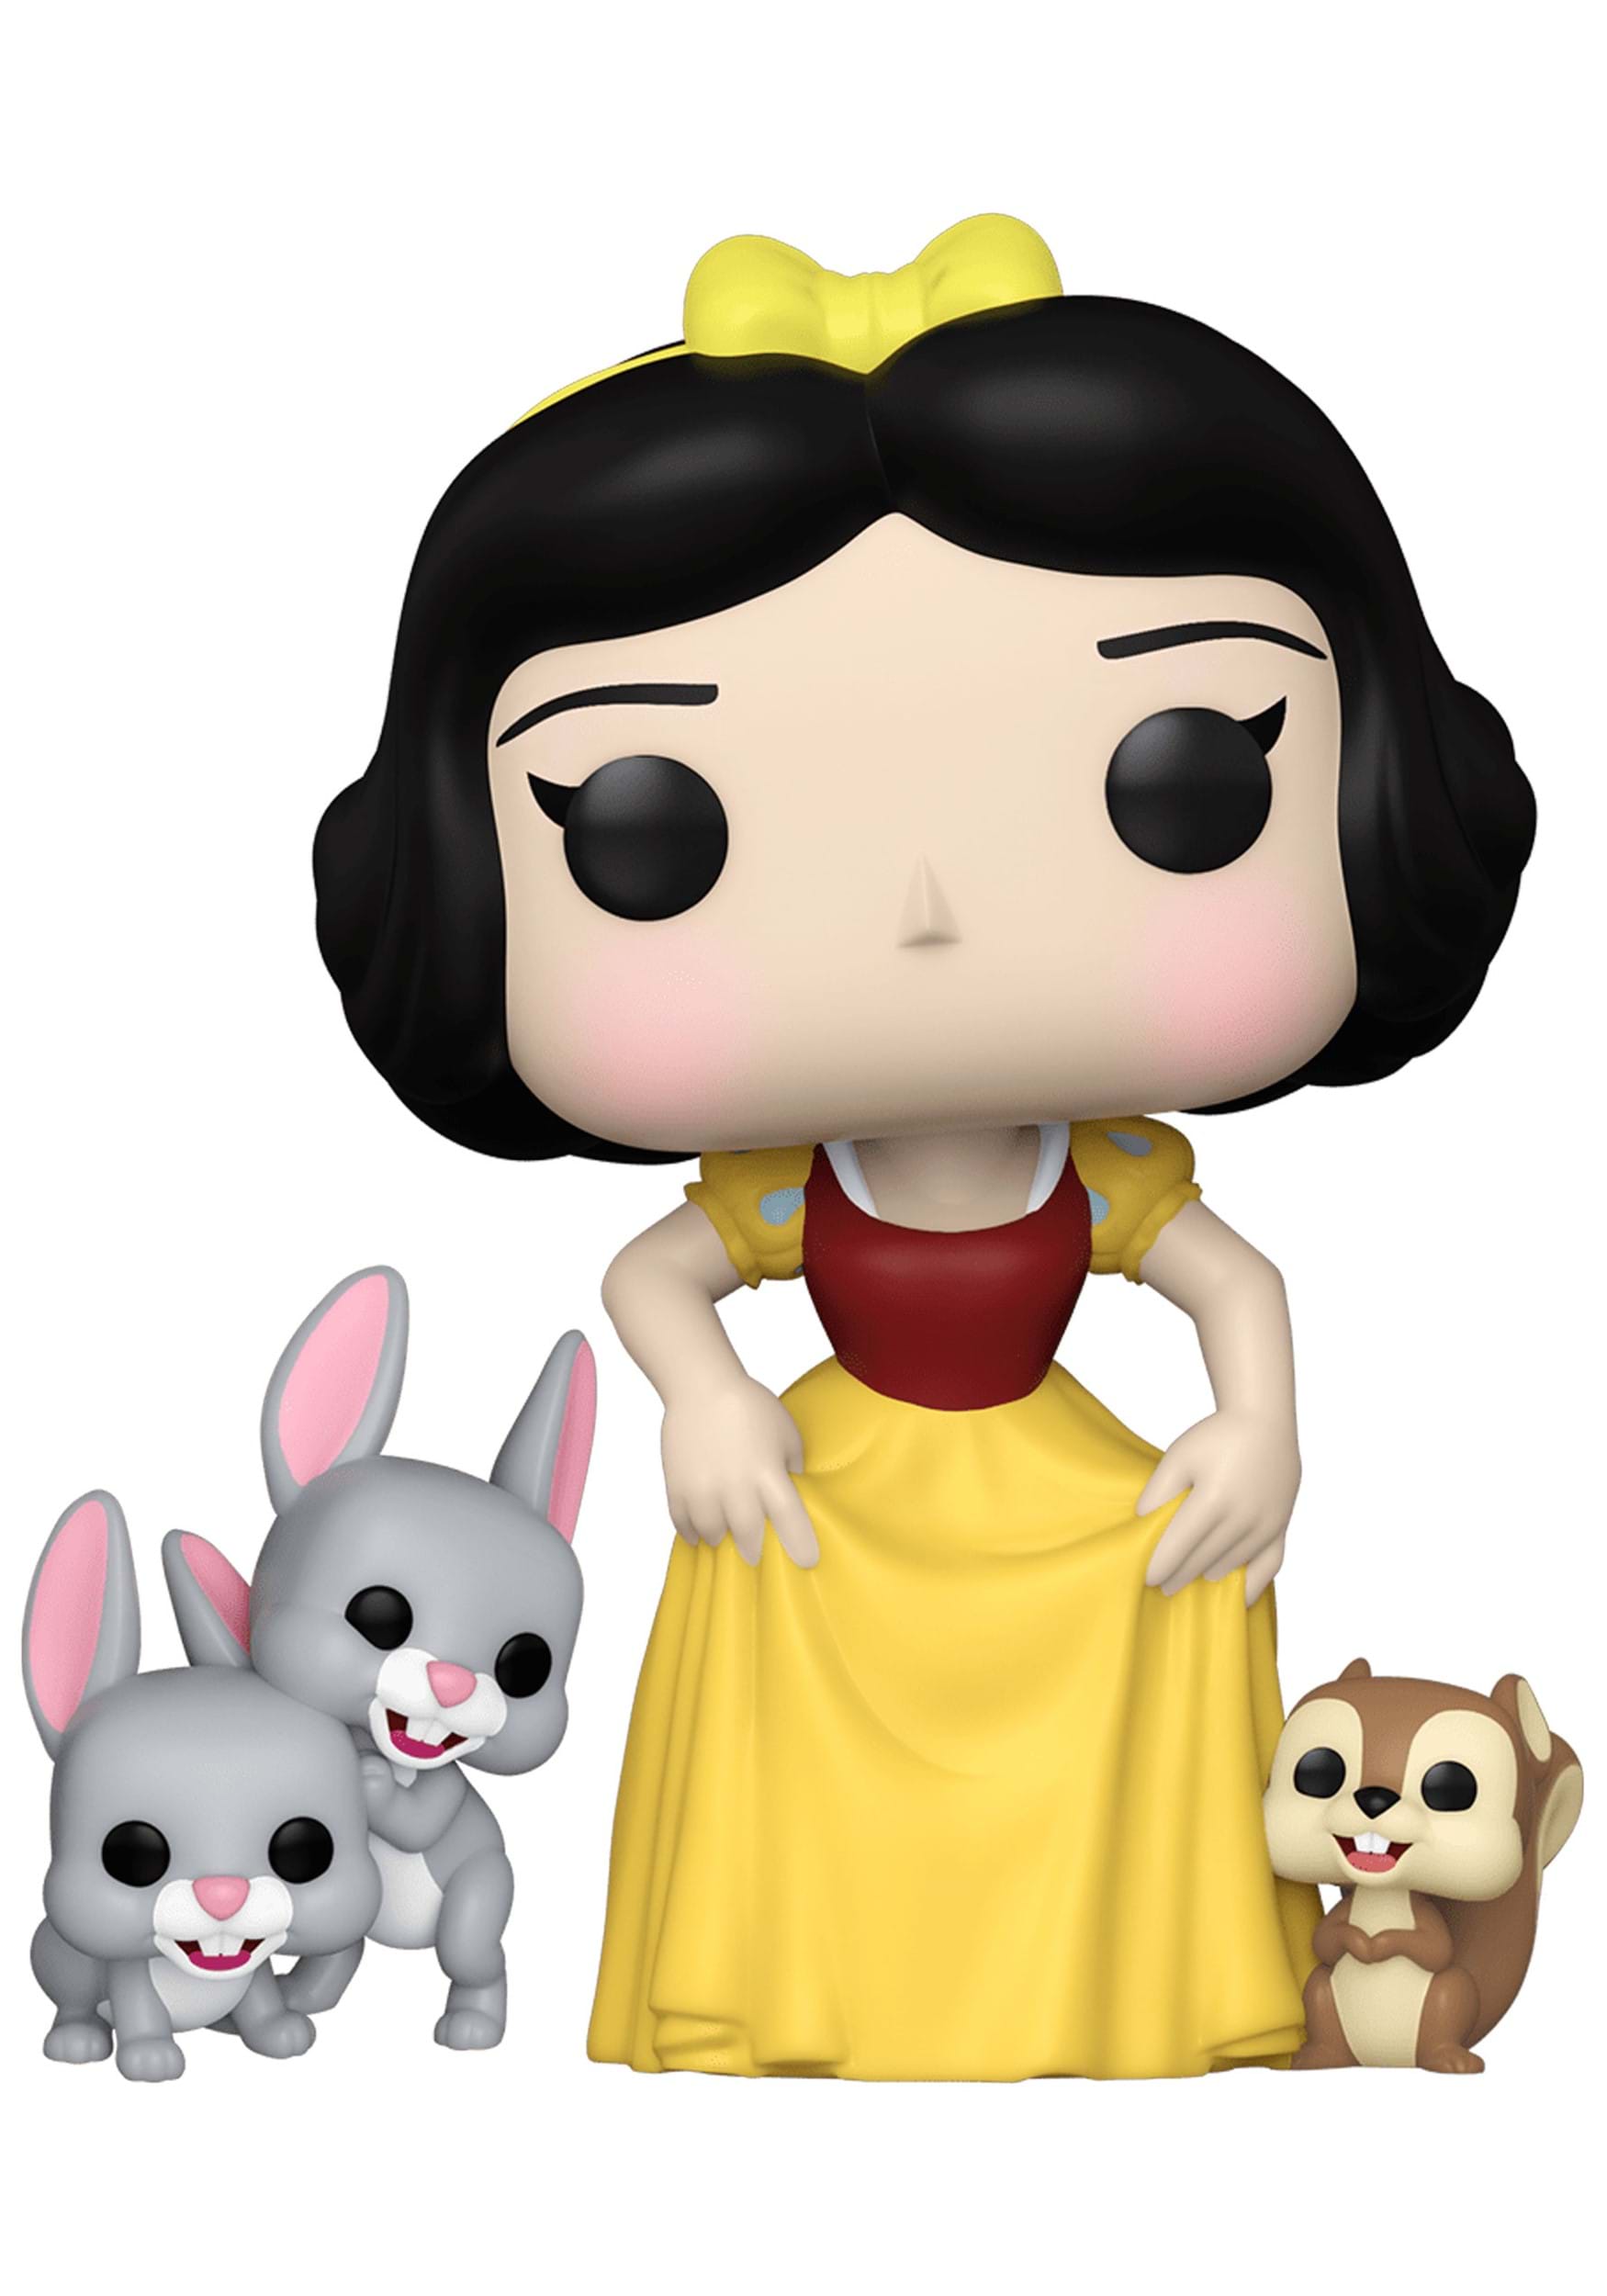 https://images.fun.com/products/90981/1-1/pop-movie-poster-disney-snow-white.jpg